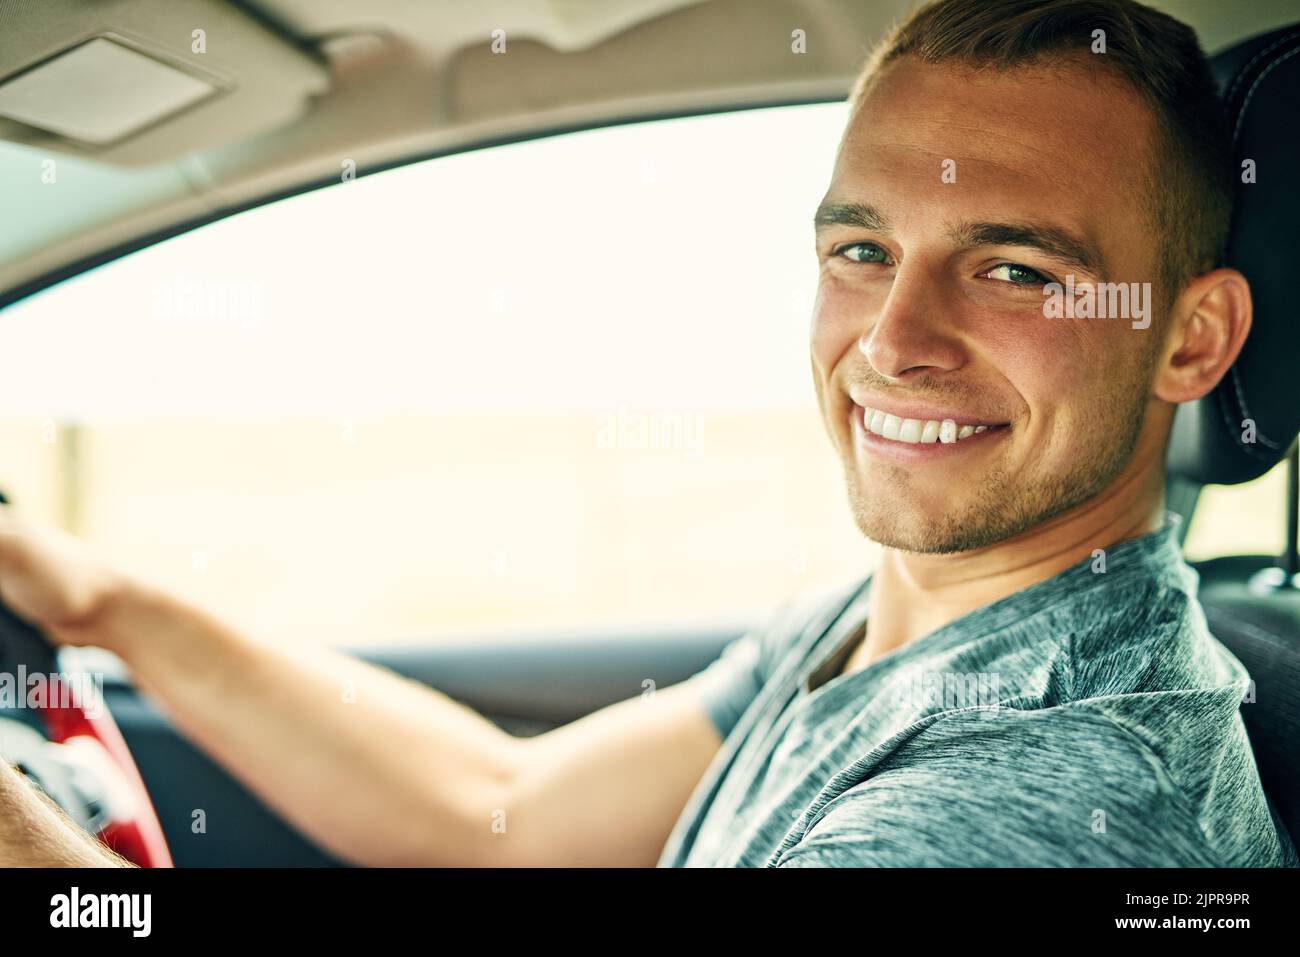 Weekends are when I take my wheels wherever I want. Portrait of a young man driving a car. Stock Photo